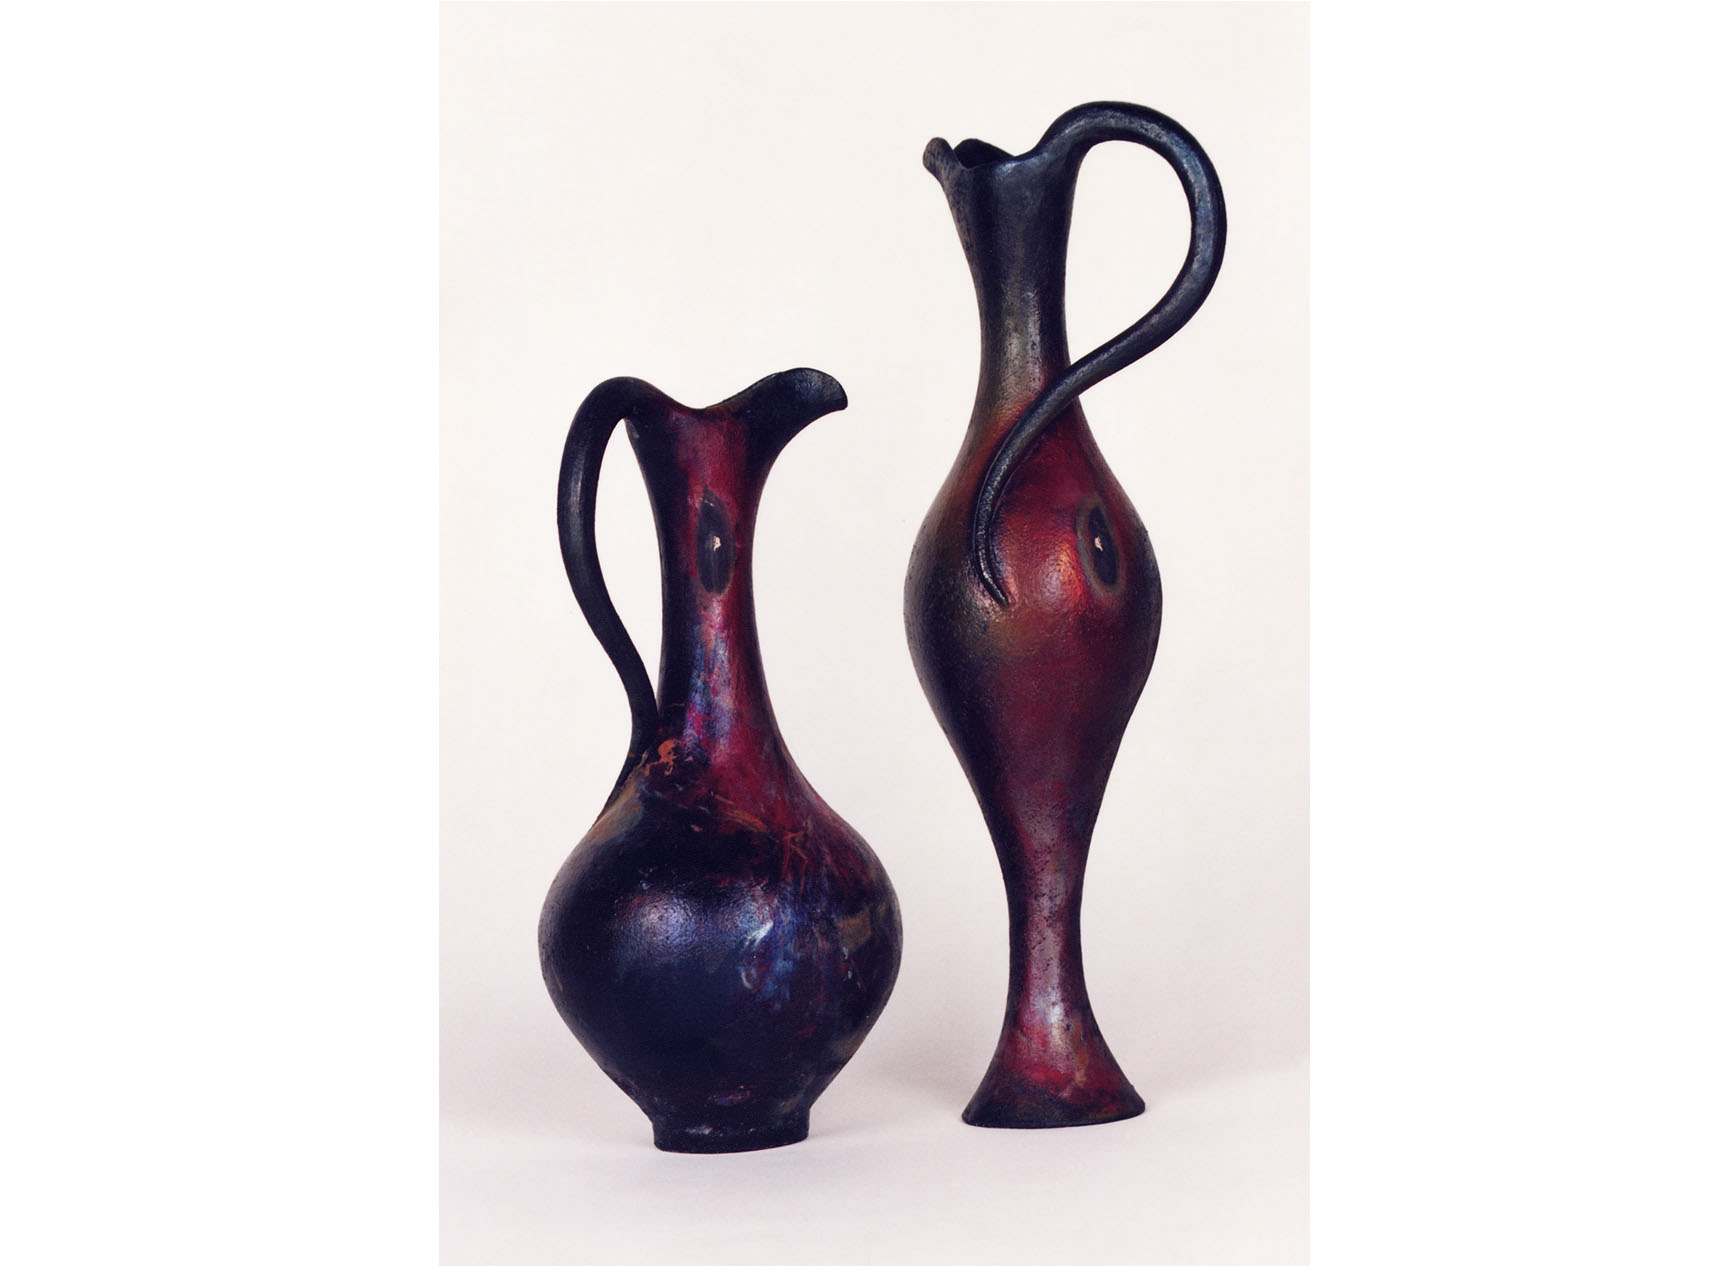 Two curvacious vases, raku fired, called Eyes of the Tiger